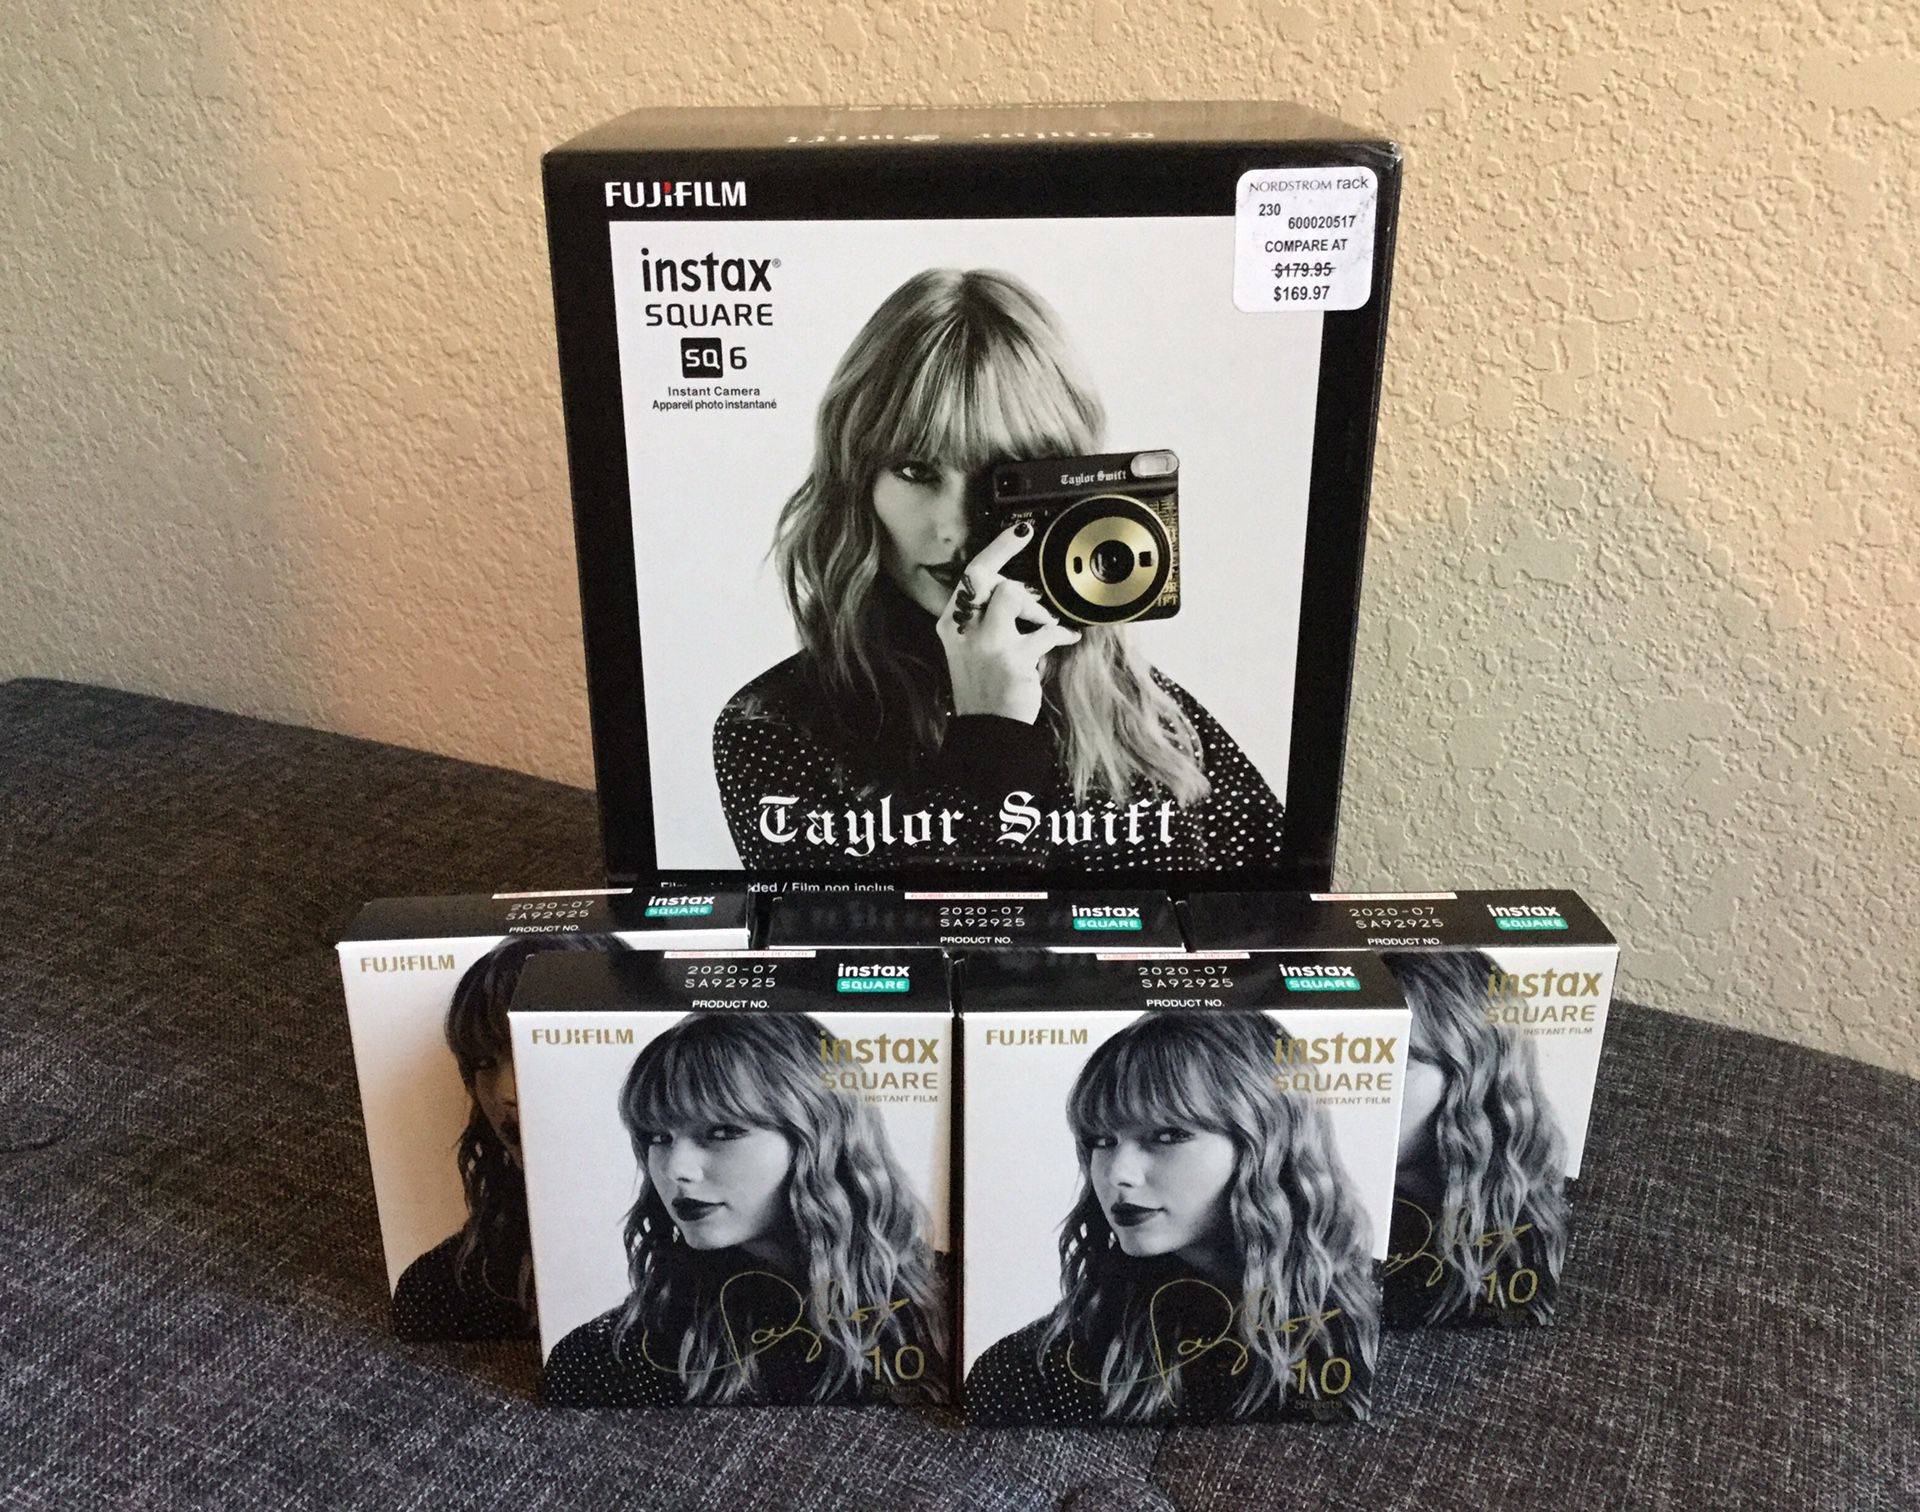 Limited Edition Taylor Swift Instax Camera and Film Bundle